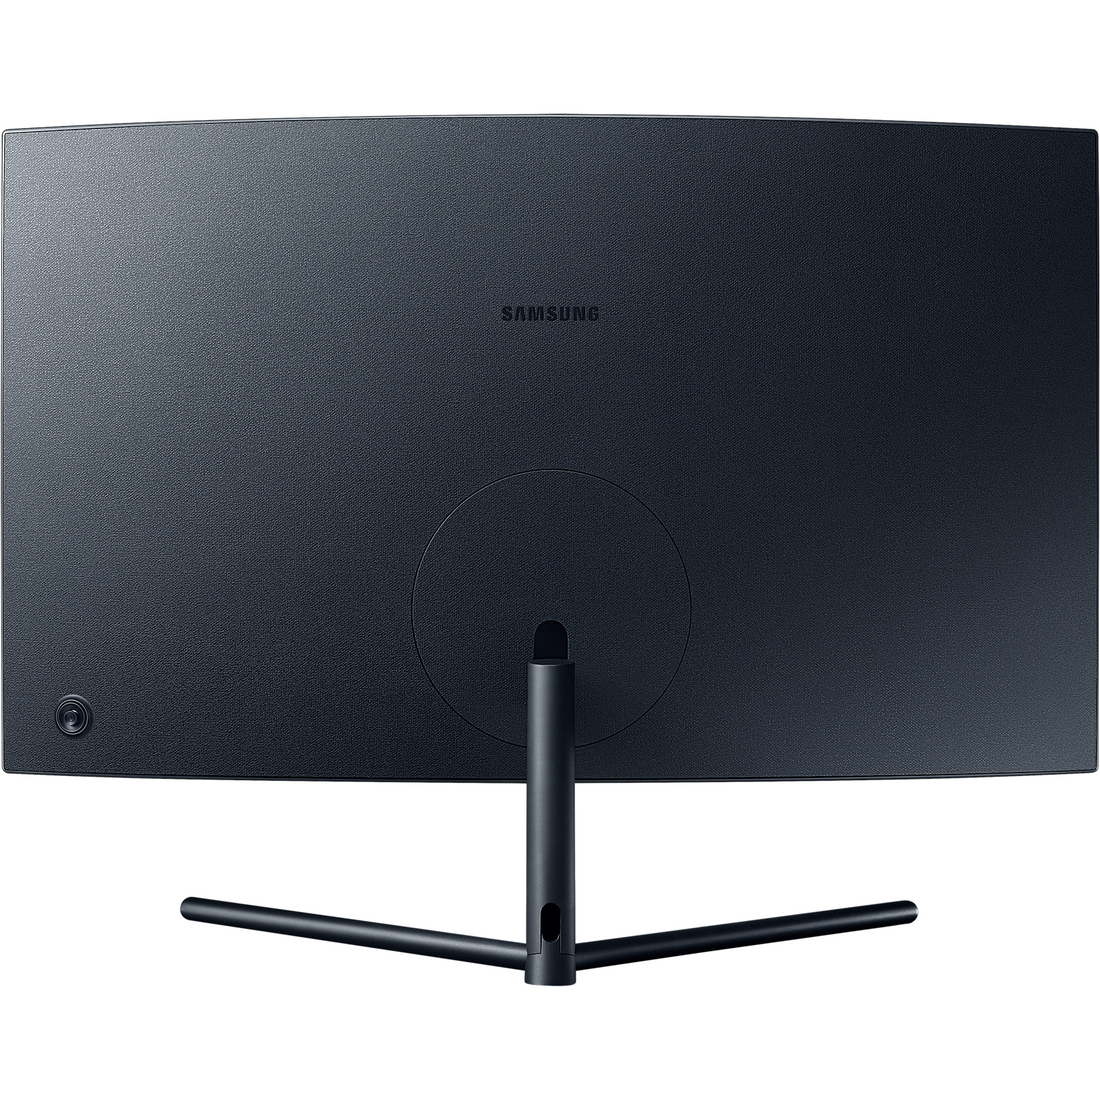 32 Inch UHD Curved monitor with 1 billion colours